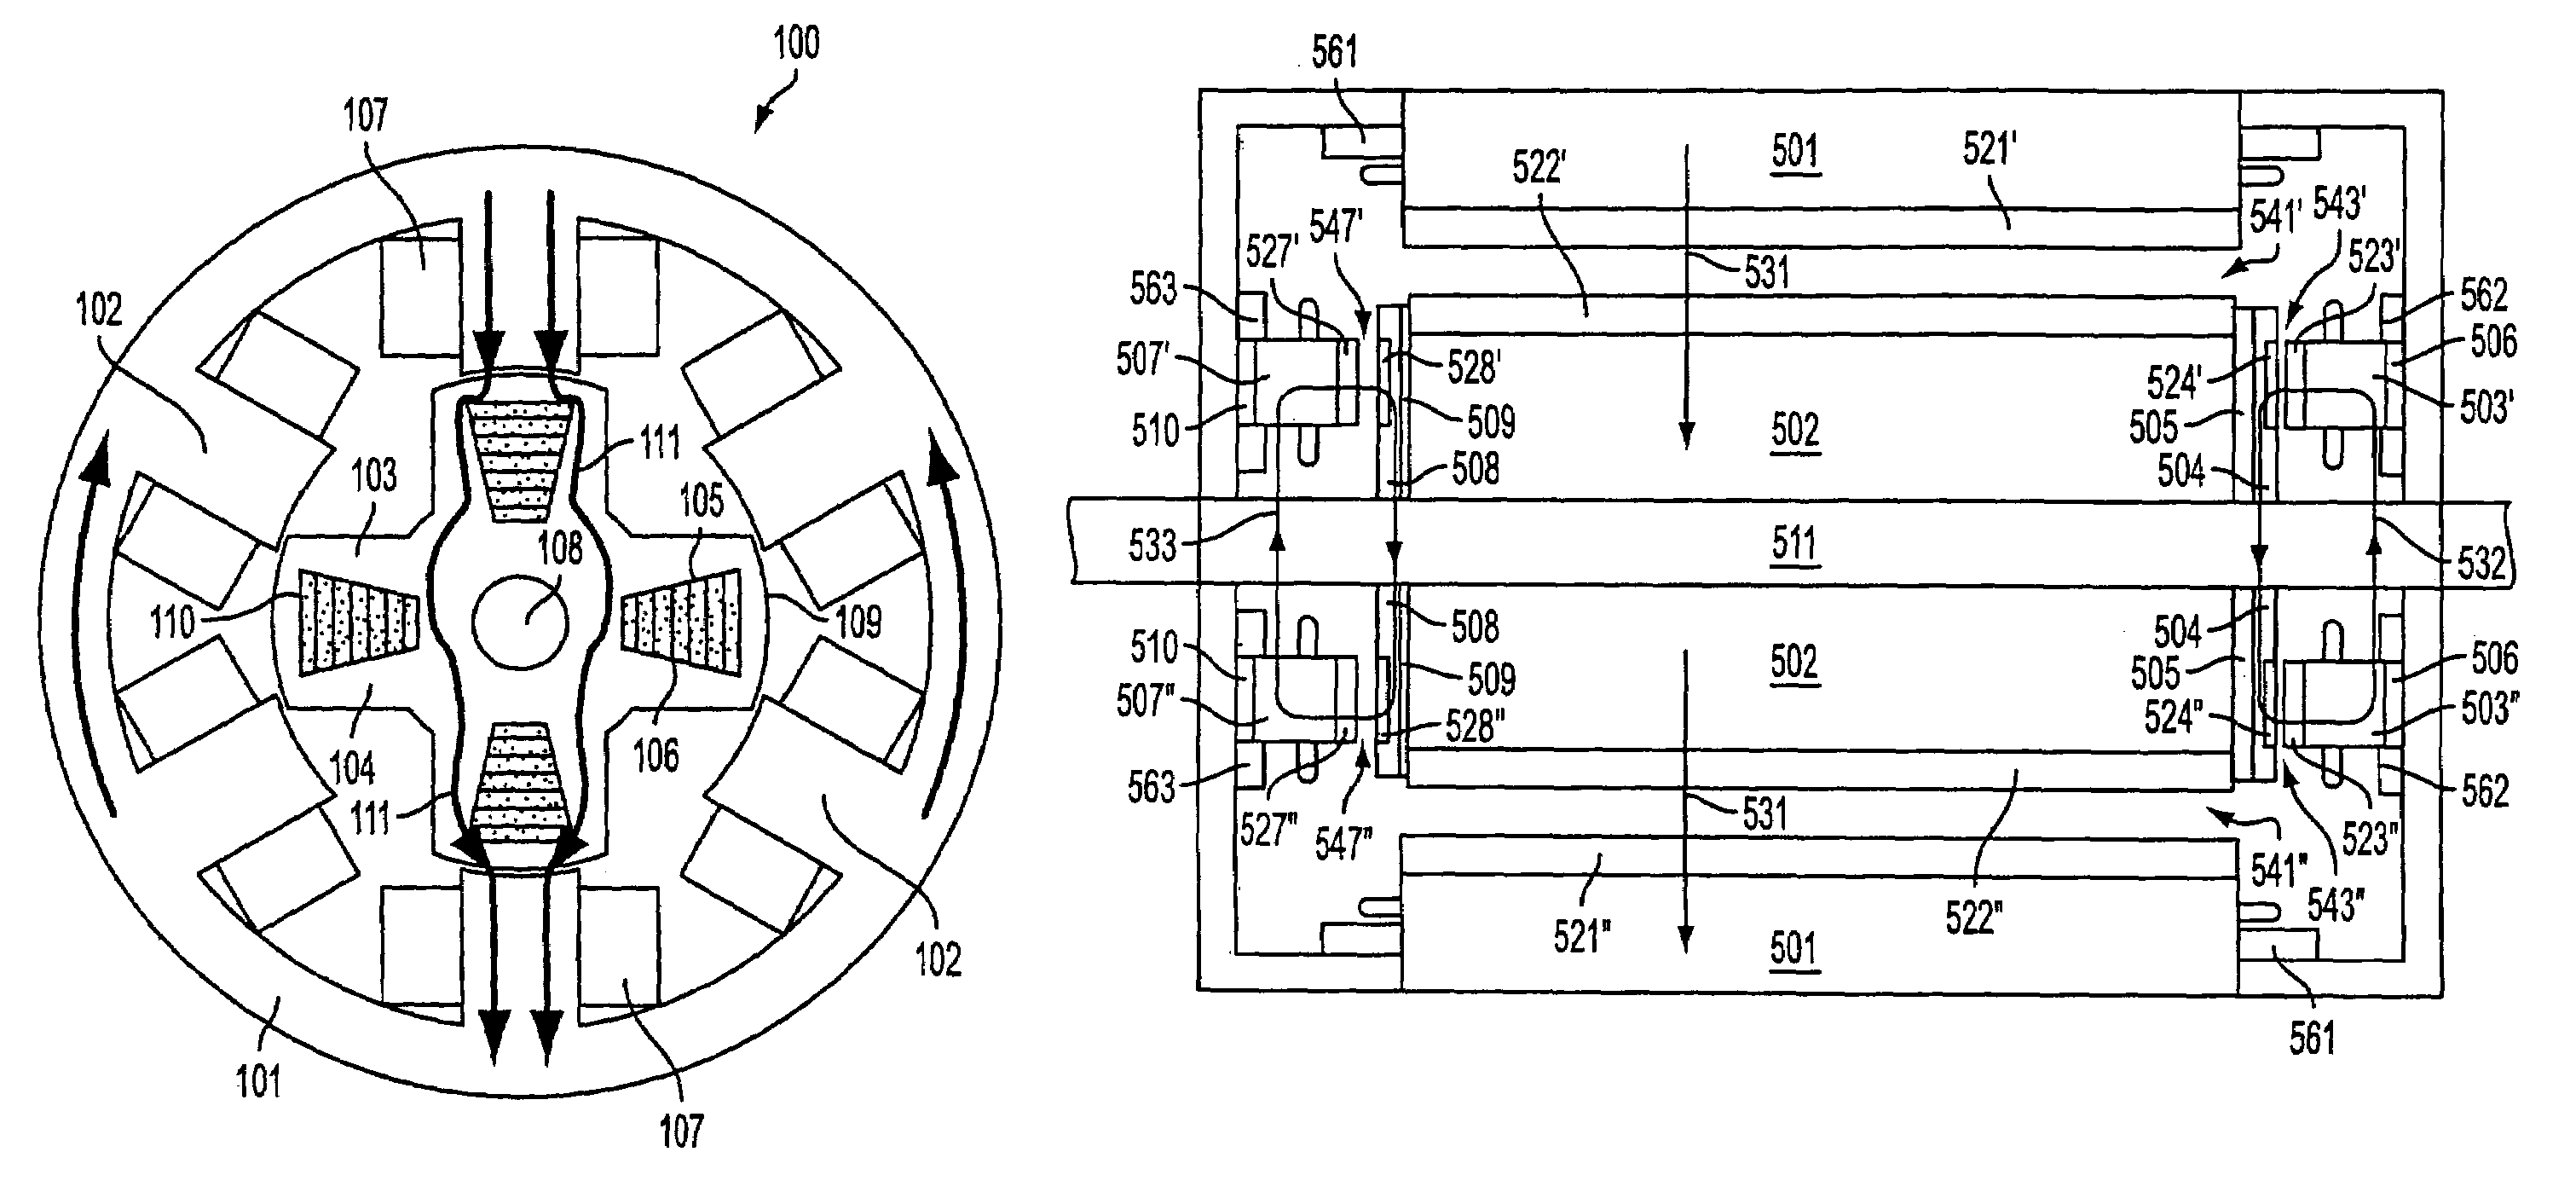 Radial-axial electromagnetic flux electric motor, coaxial electromagnetic flux electric motor, and rotor for same